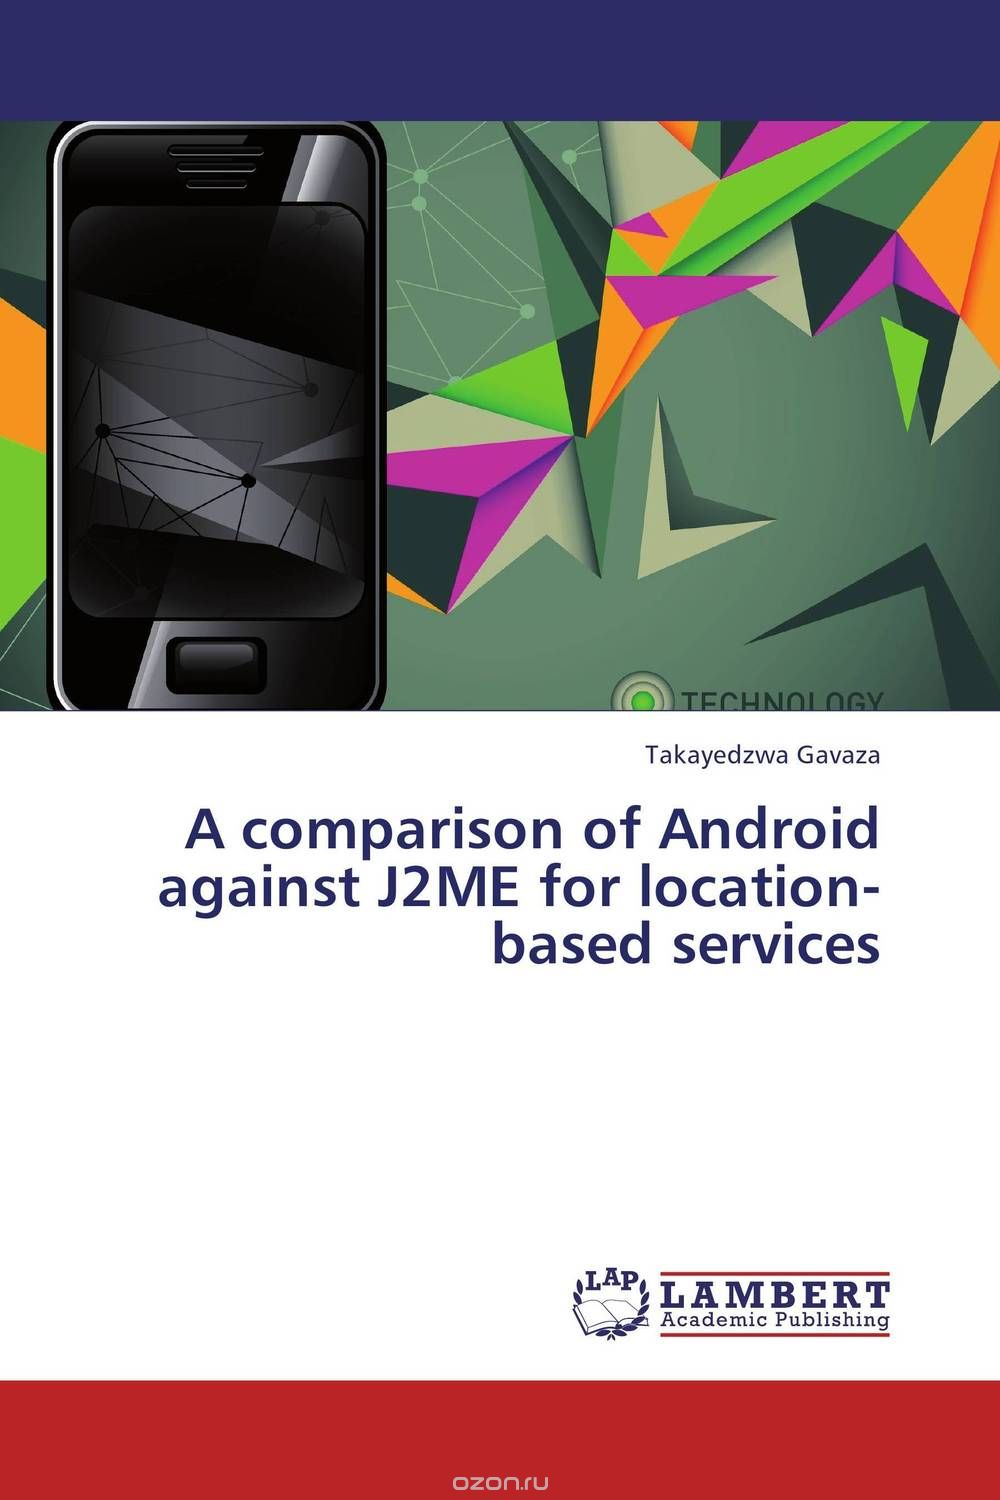 Скачать книгу "A comparison of Android against J2ME for location-based services"